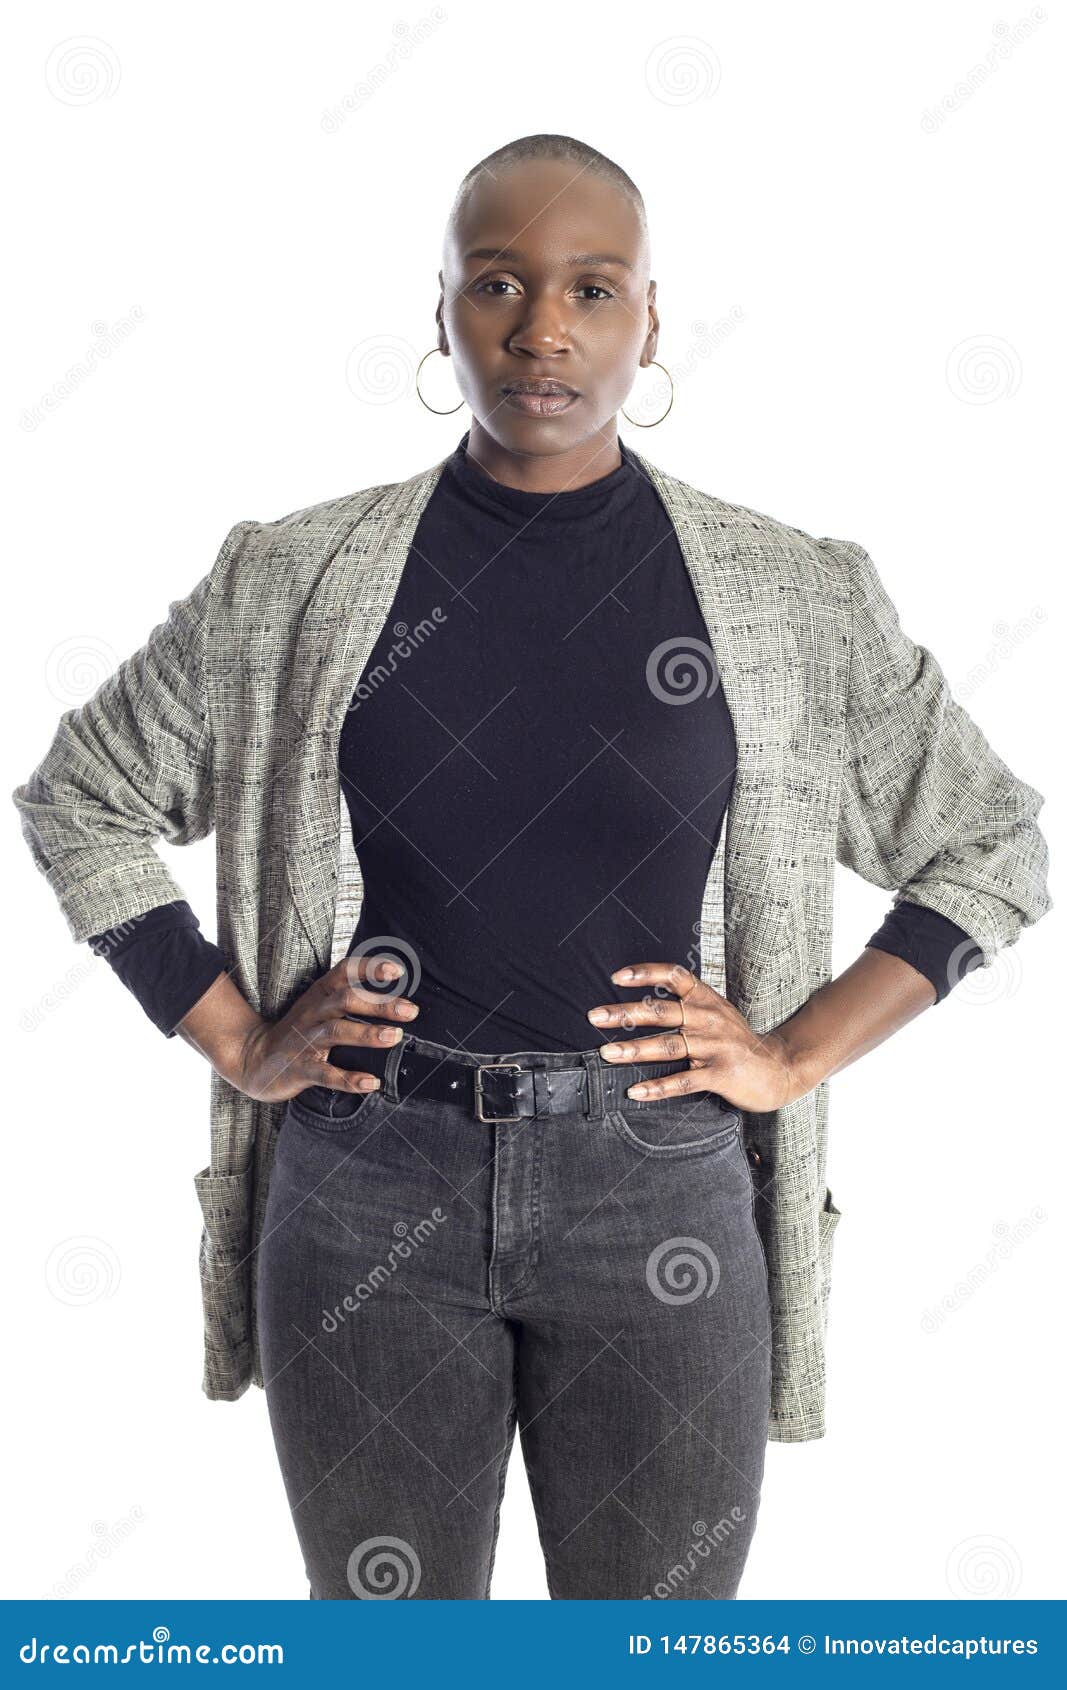 black business casual